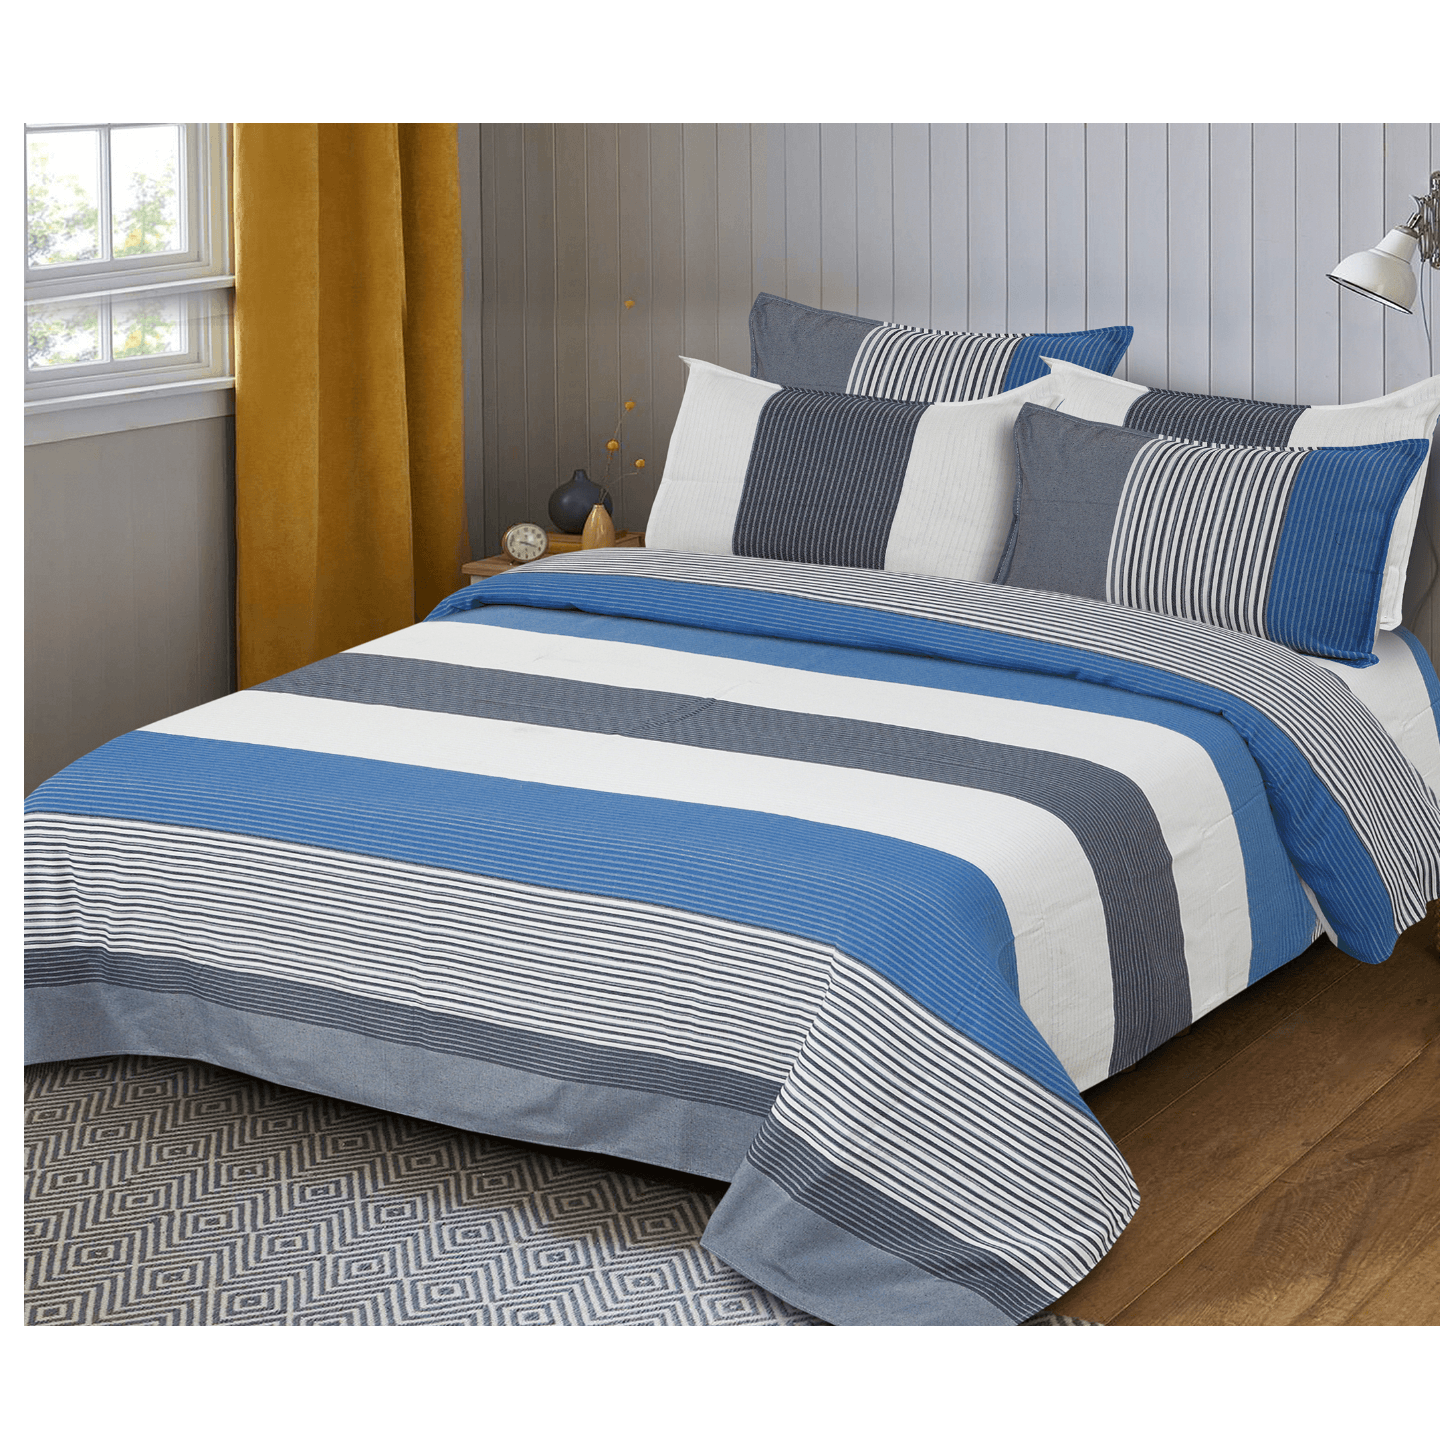 Handtex Home Cotton Double Bed Sheet With 2 Pillow Cover Blue